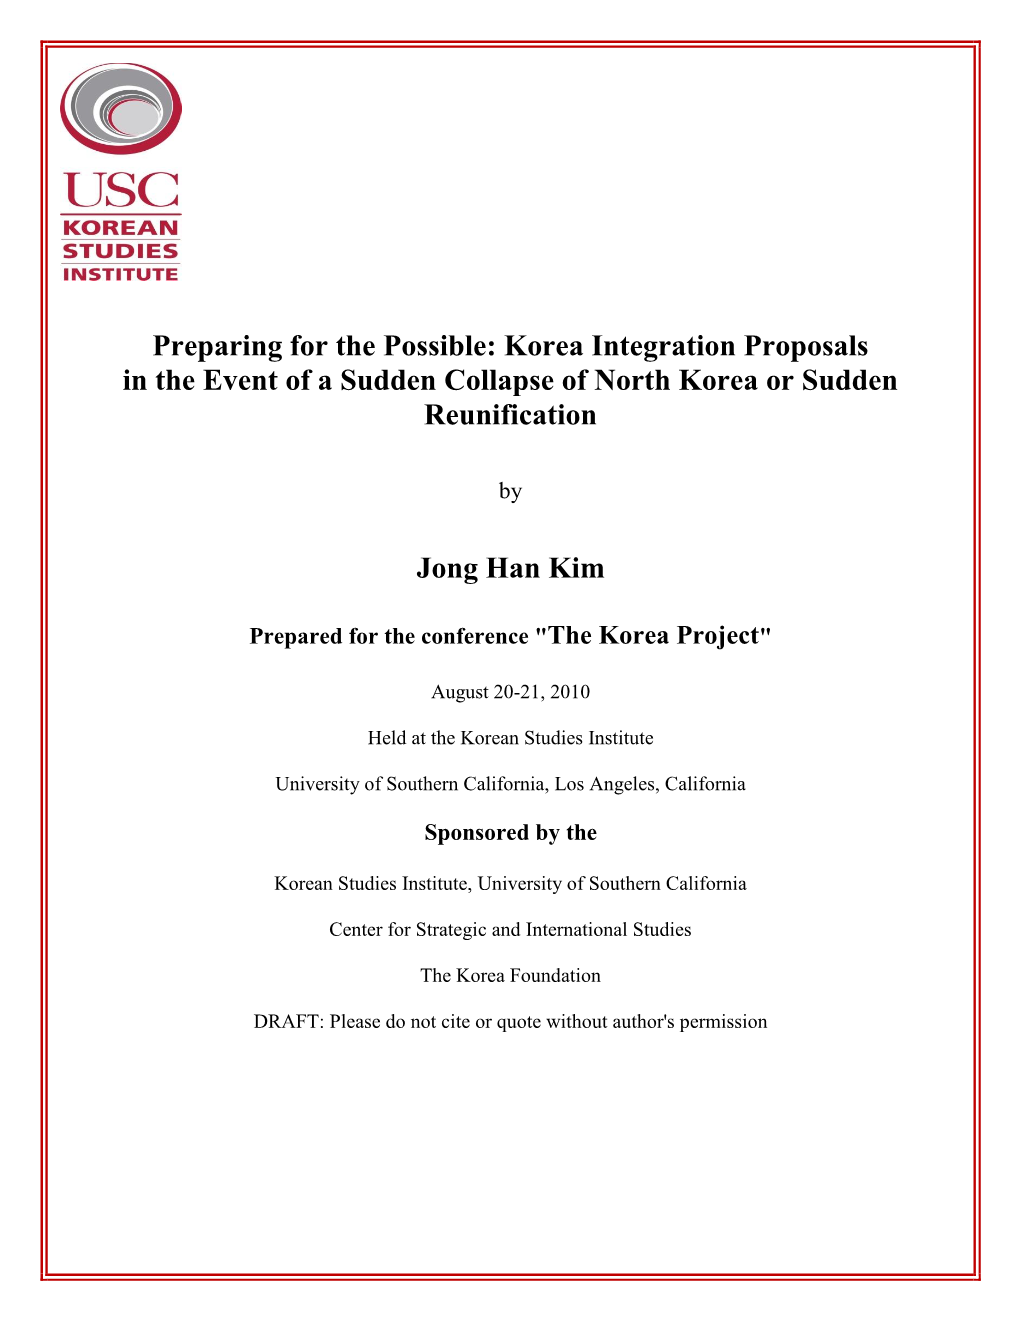 Korea Integration Proposals in the Event of a Sudden Collapse of North Korea Or Sudden Reunification